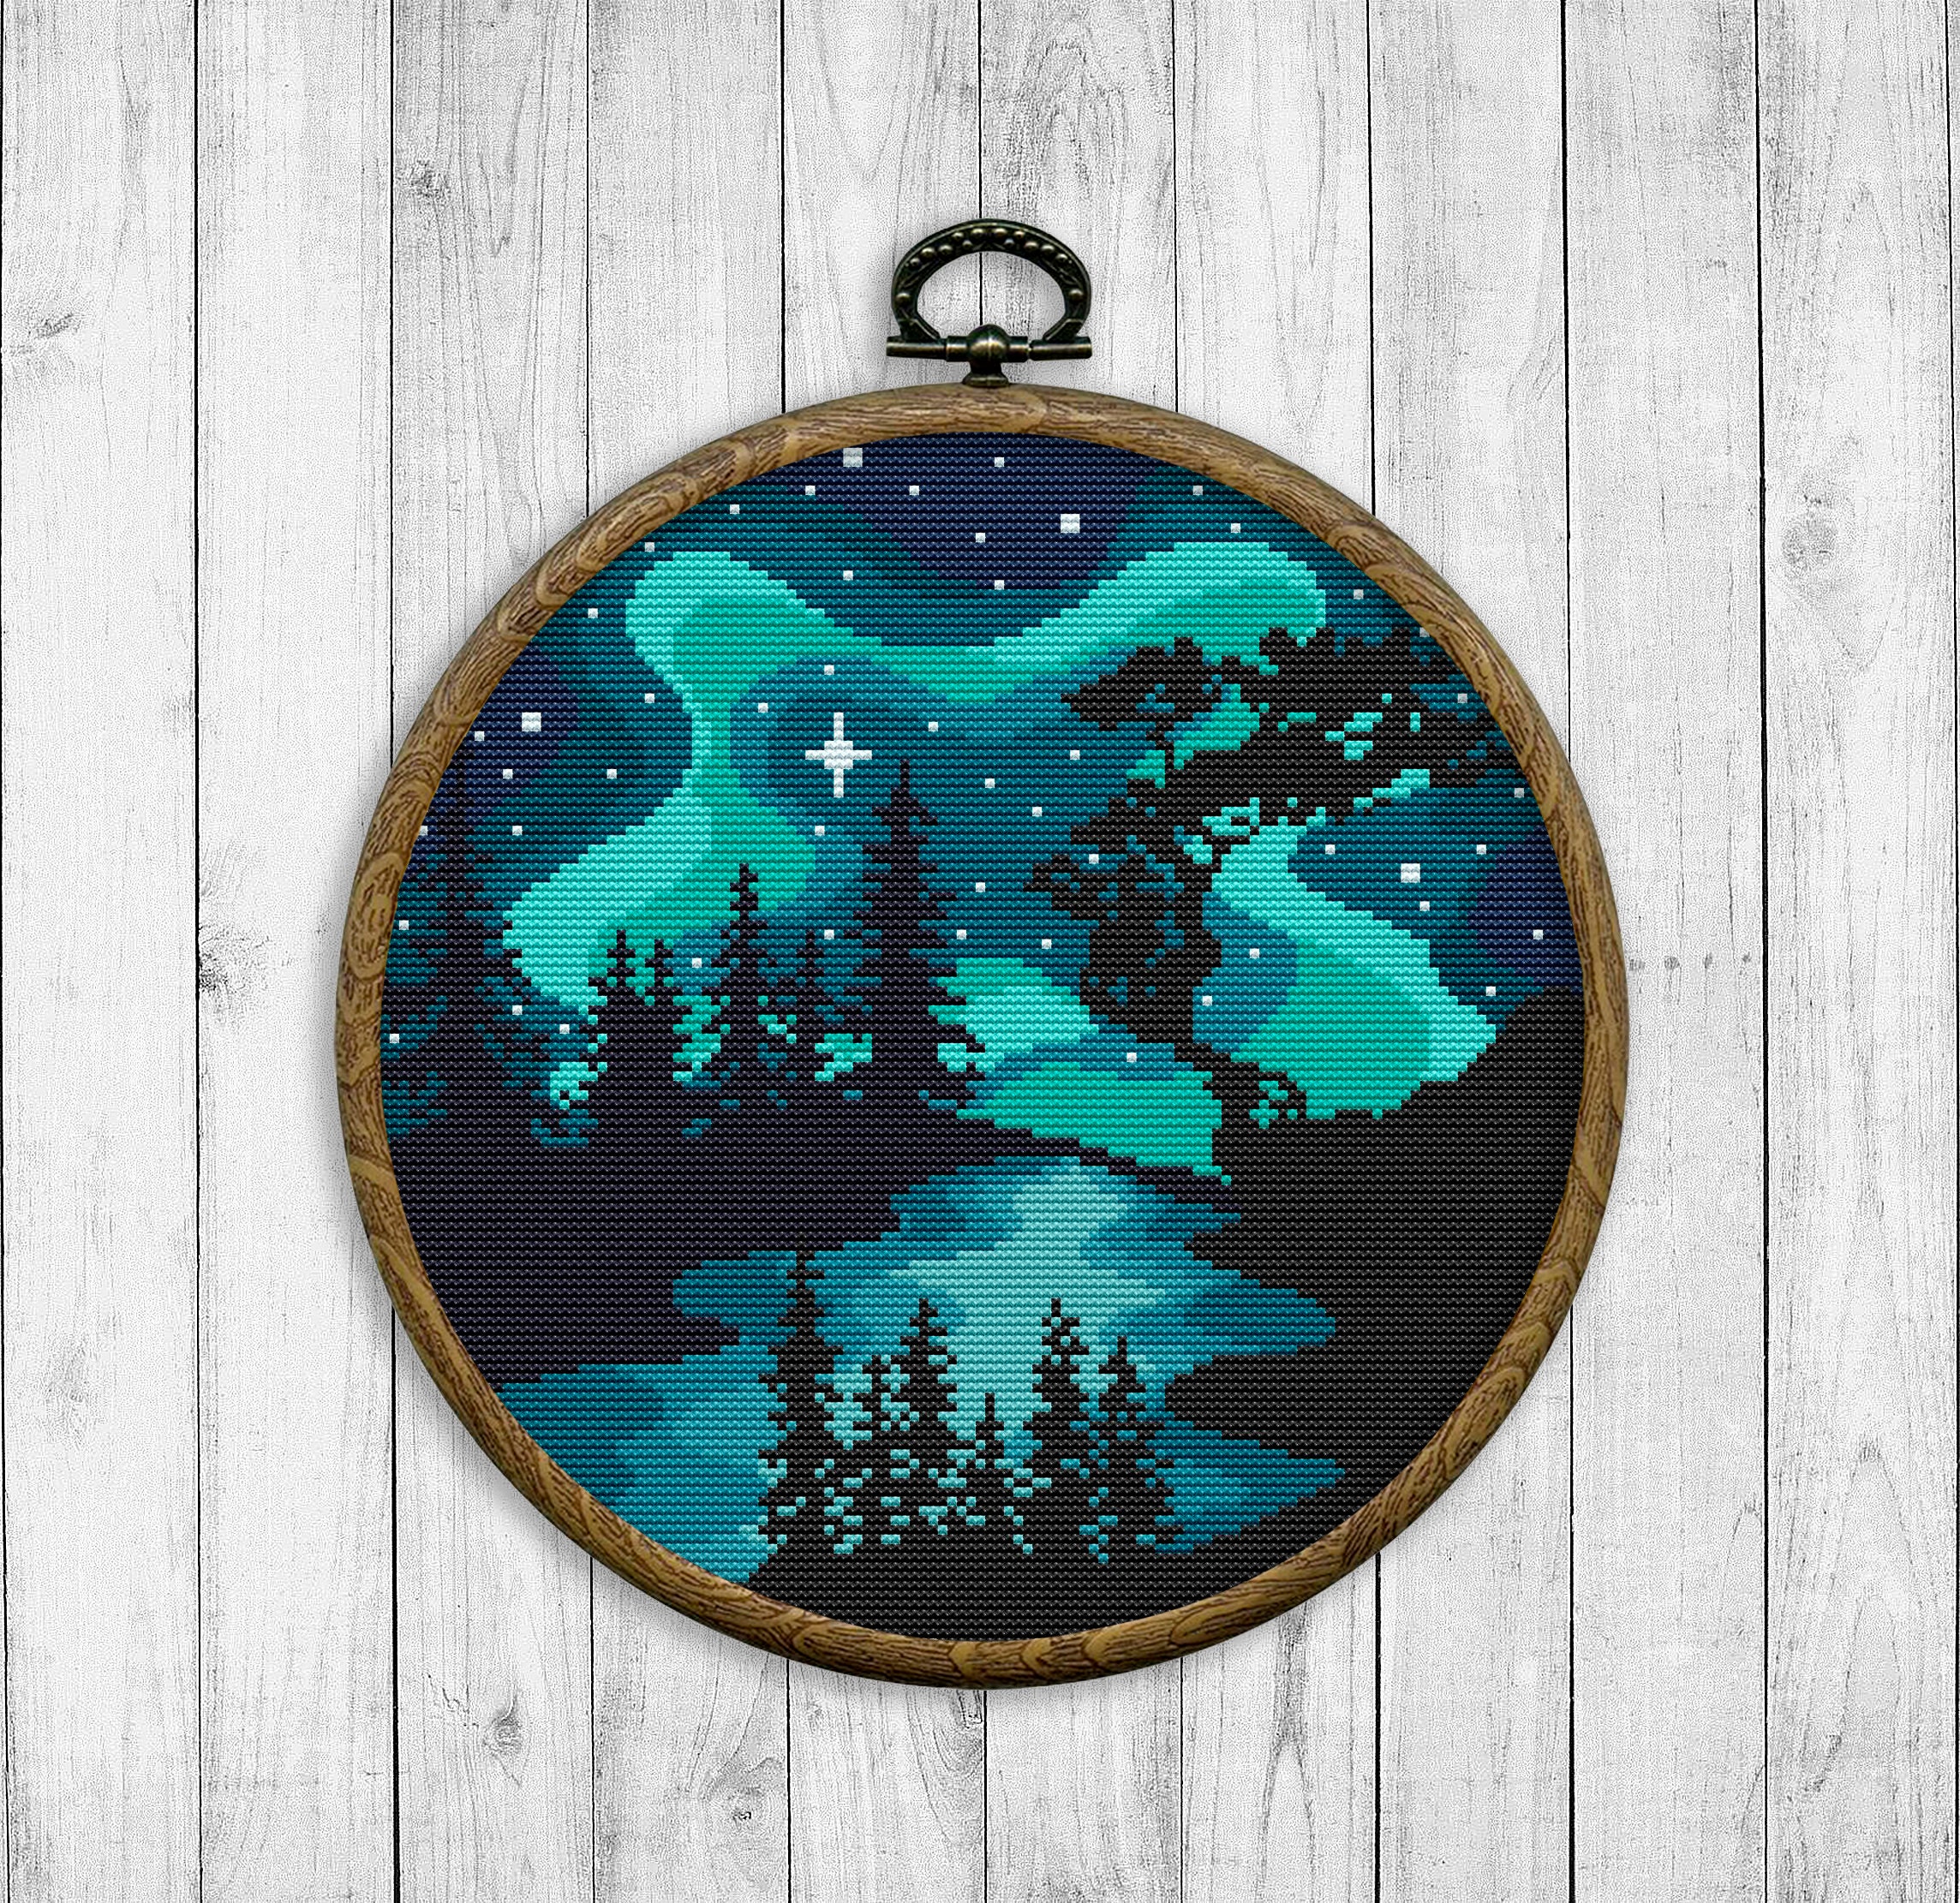 Landscape Embroidery Art Encapsulates the Beauty of the Northern Lights